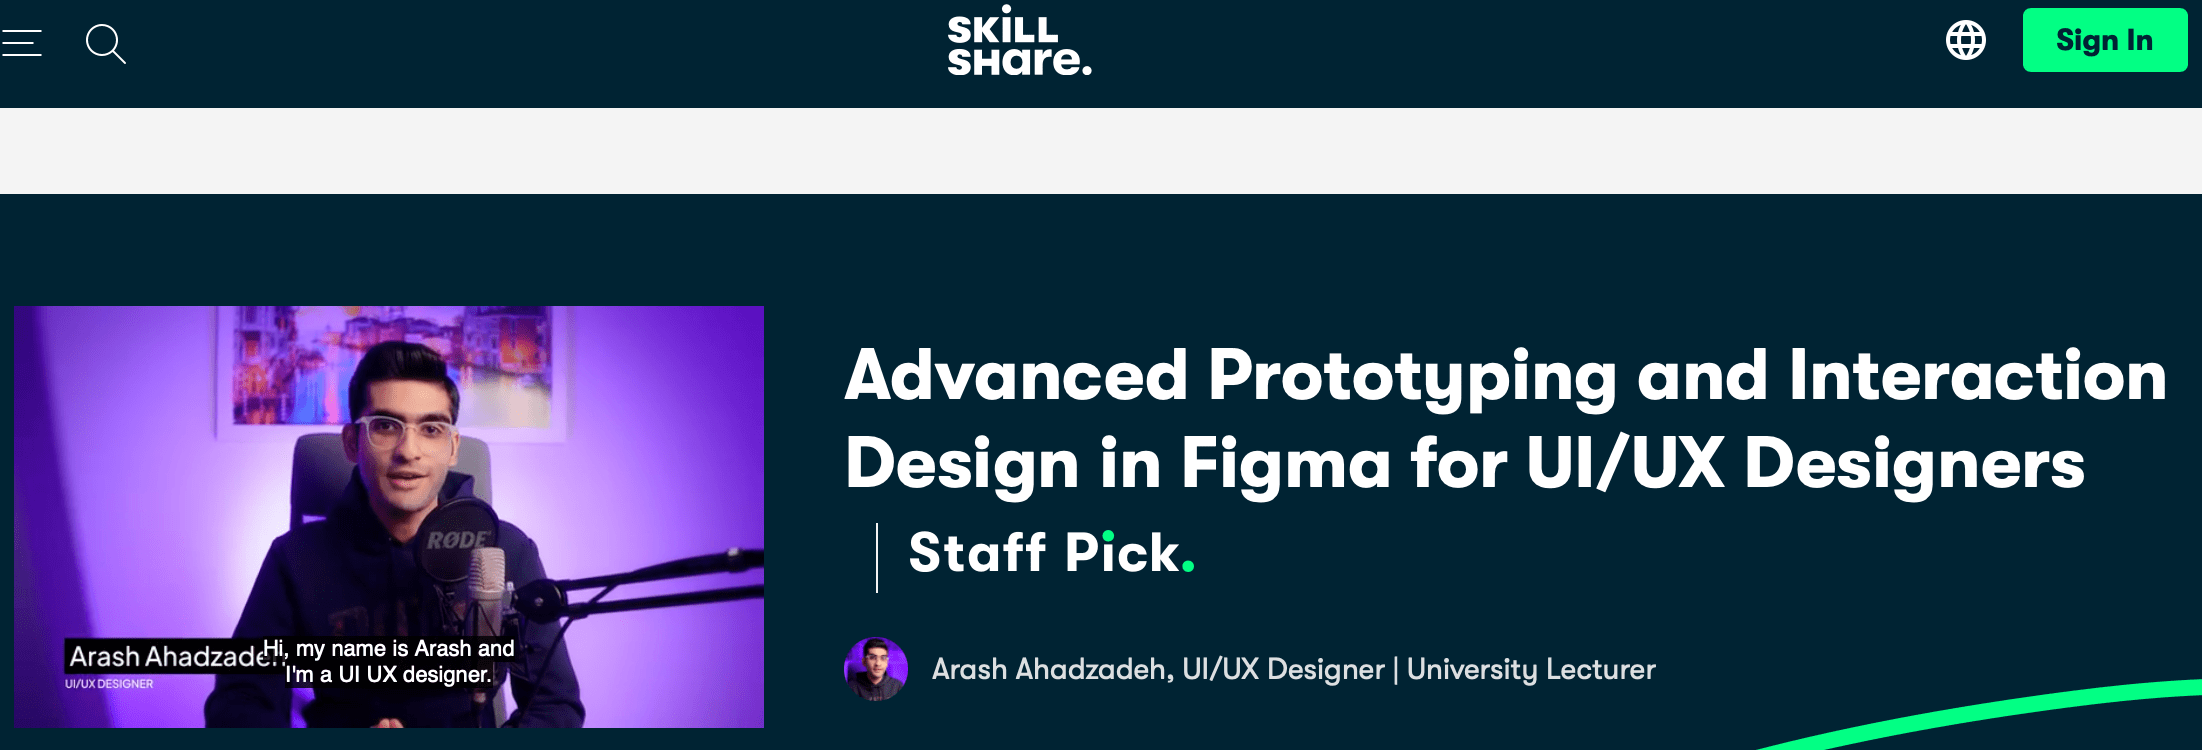 Advanced Prototyping and Interaction Design in Figma for UX:UI Designers